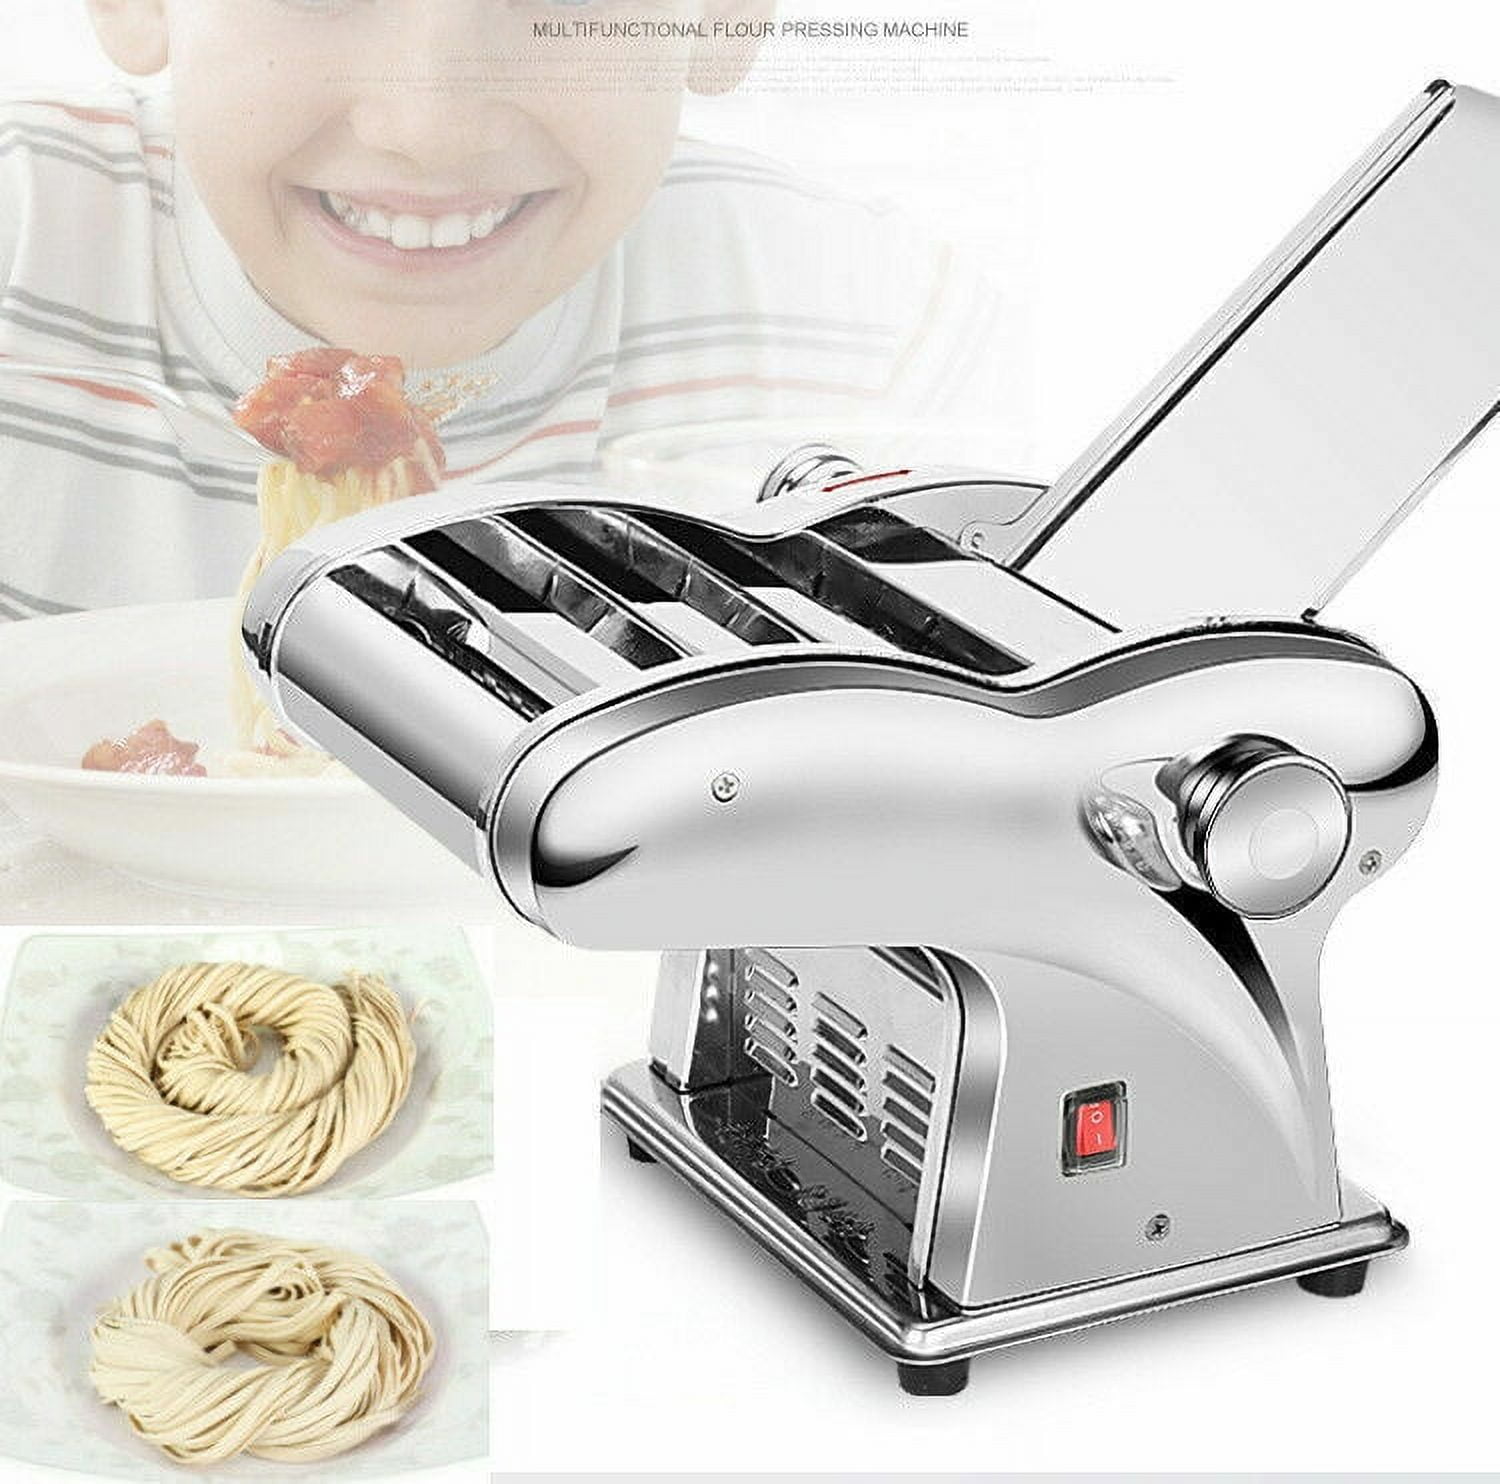 Techtongda Electric Pasta Press Maker Noodle Press Machine Home Commercial  3mm Round Knife 